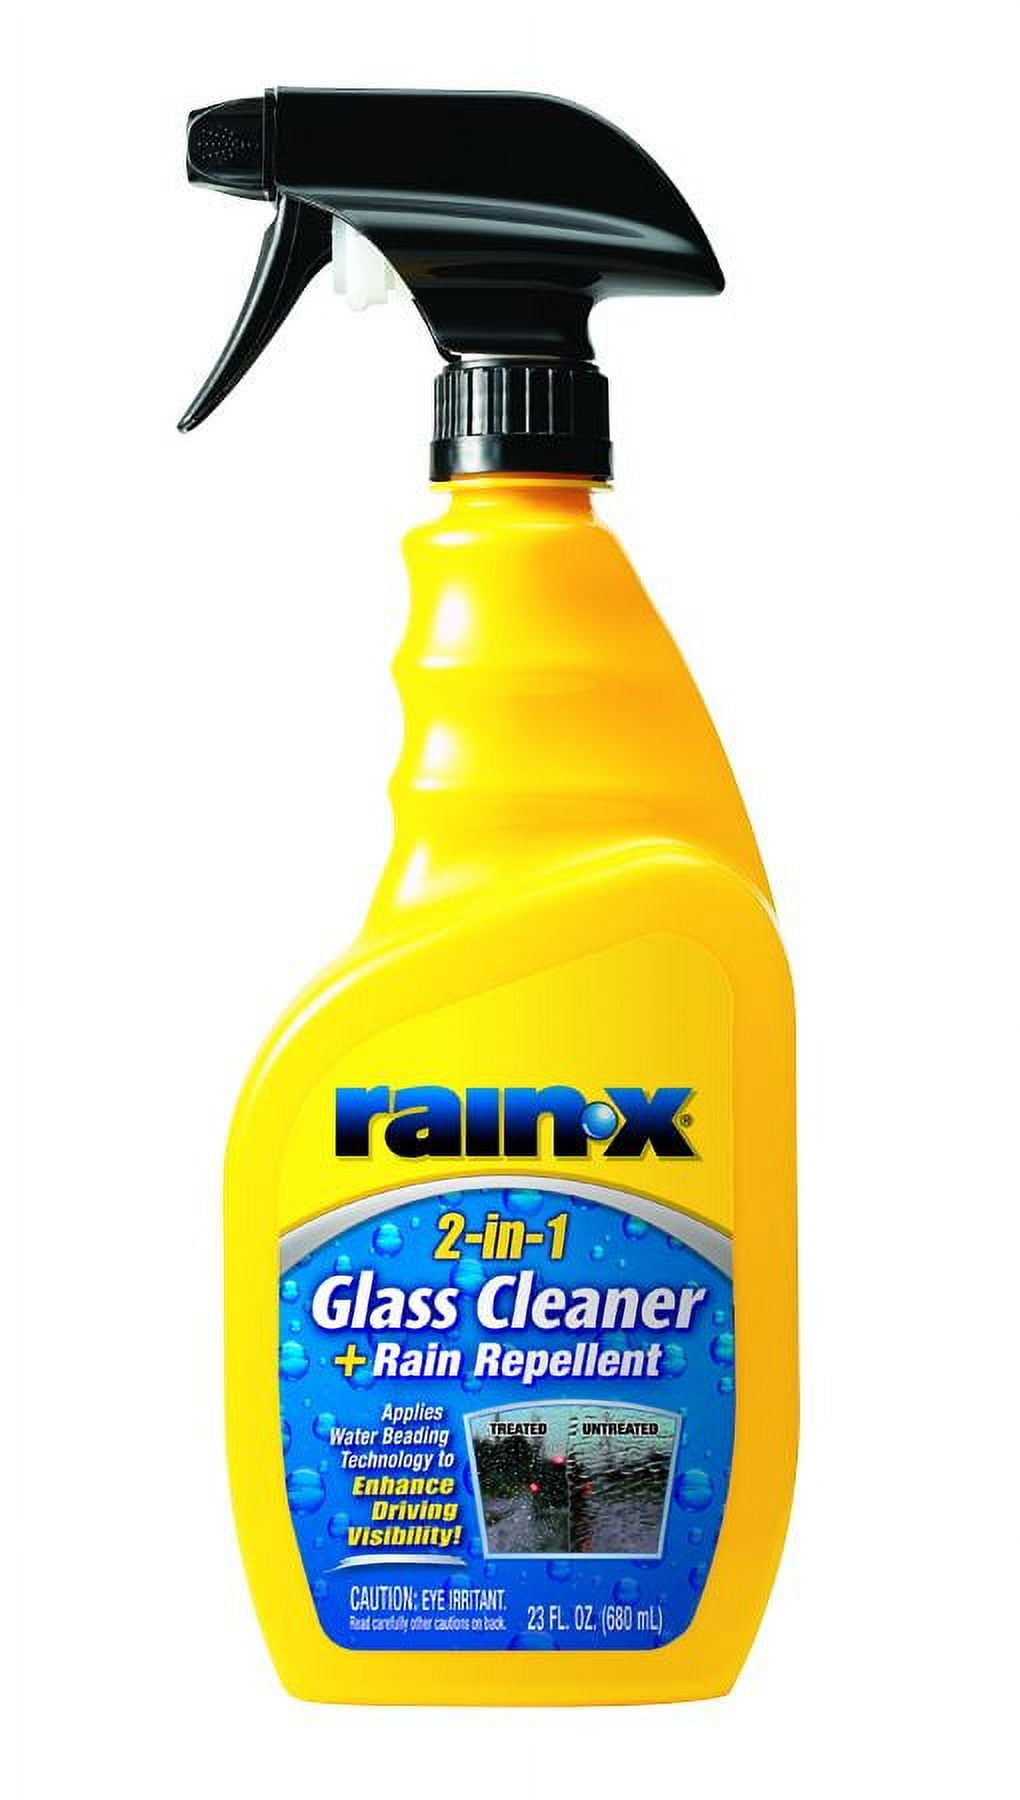 Rain-X De-Icer and Repellent 500ml - Skinny Tree Limited